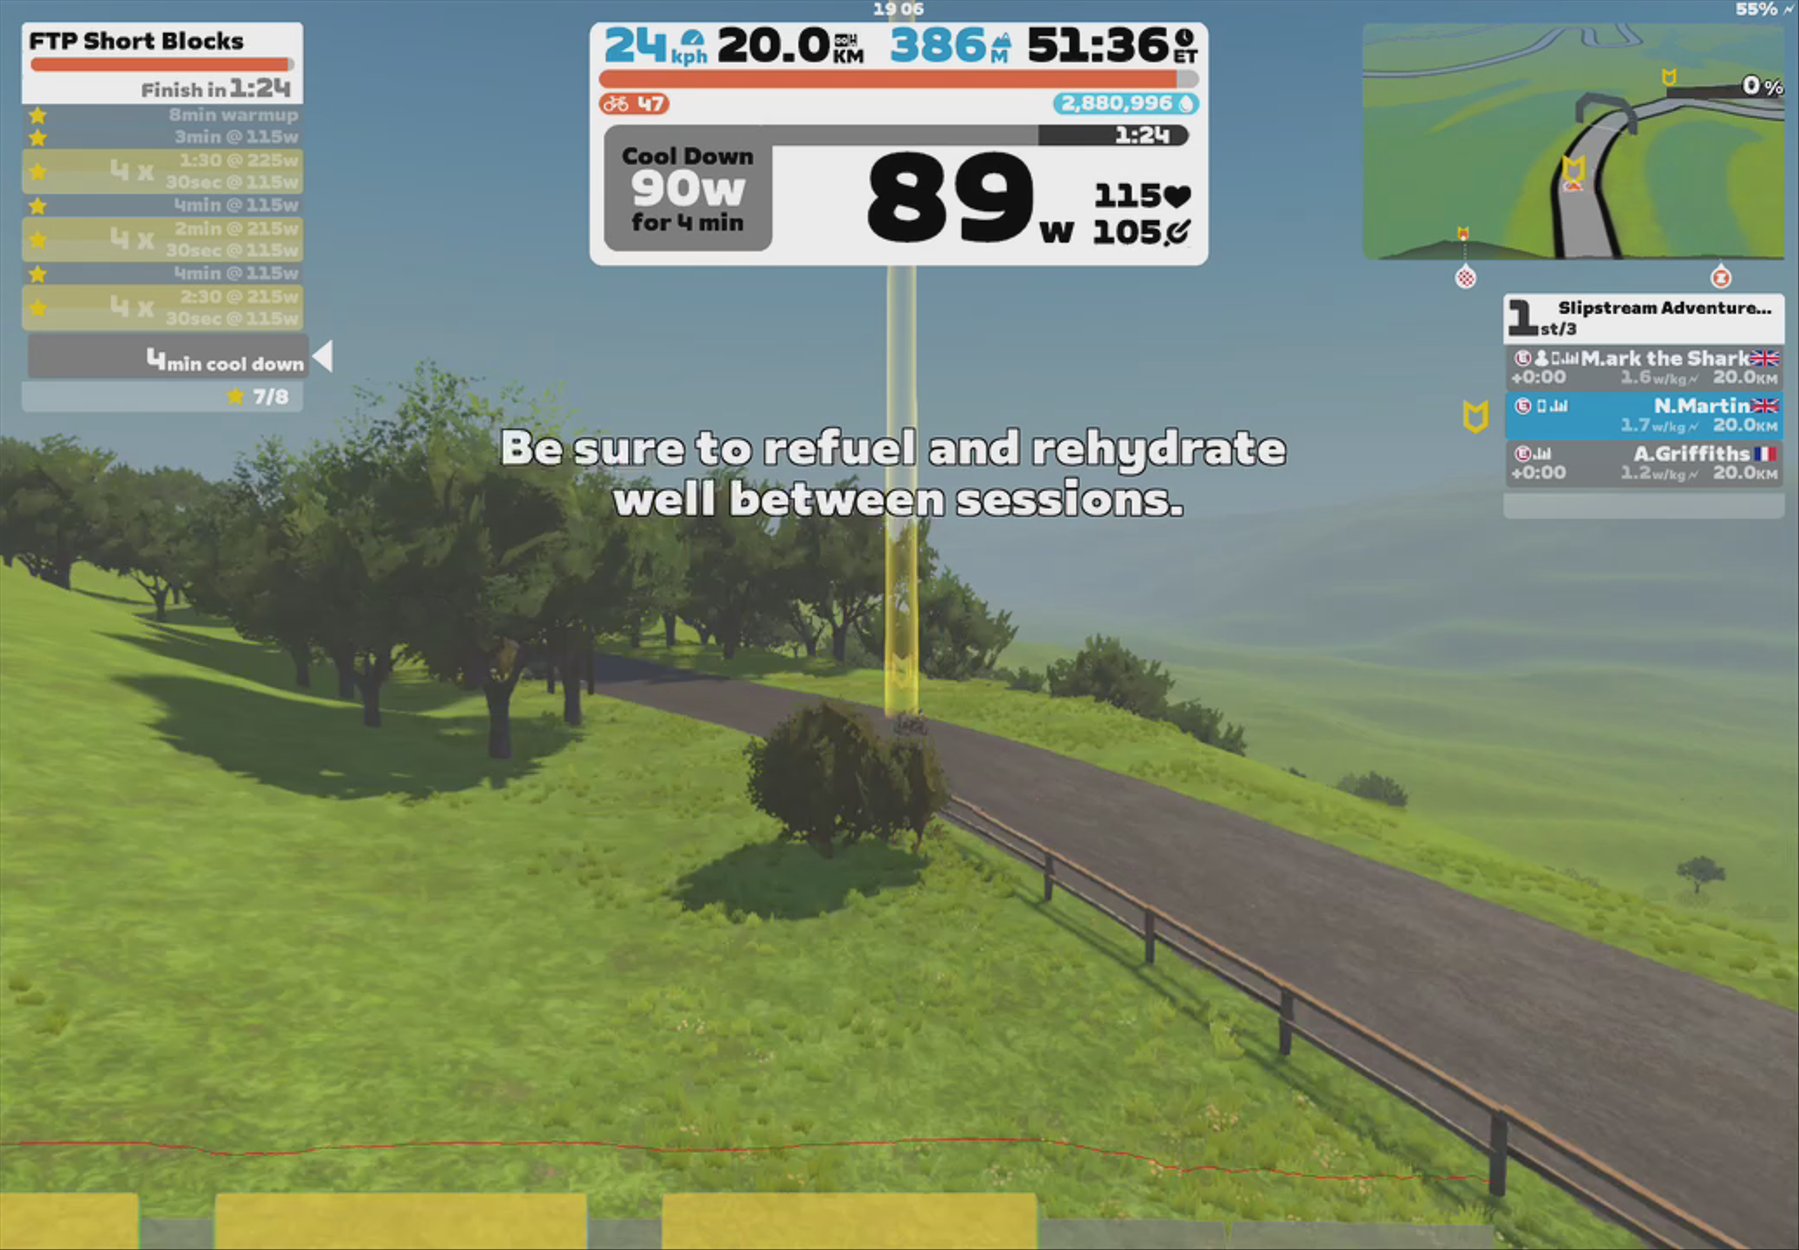 Zwift - Group Workout: Slipstream Adventures Tuesday Night Workout: FTP Short Blocks on London Loop Reverse in London